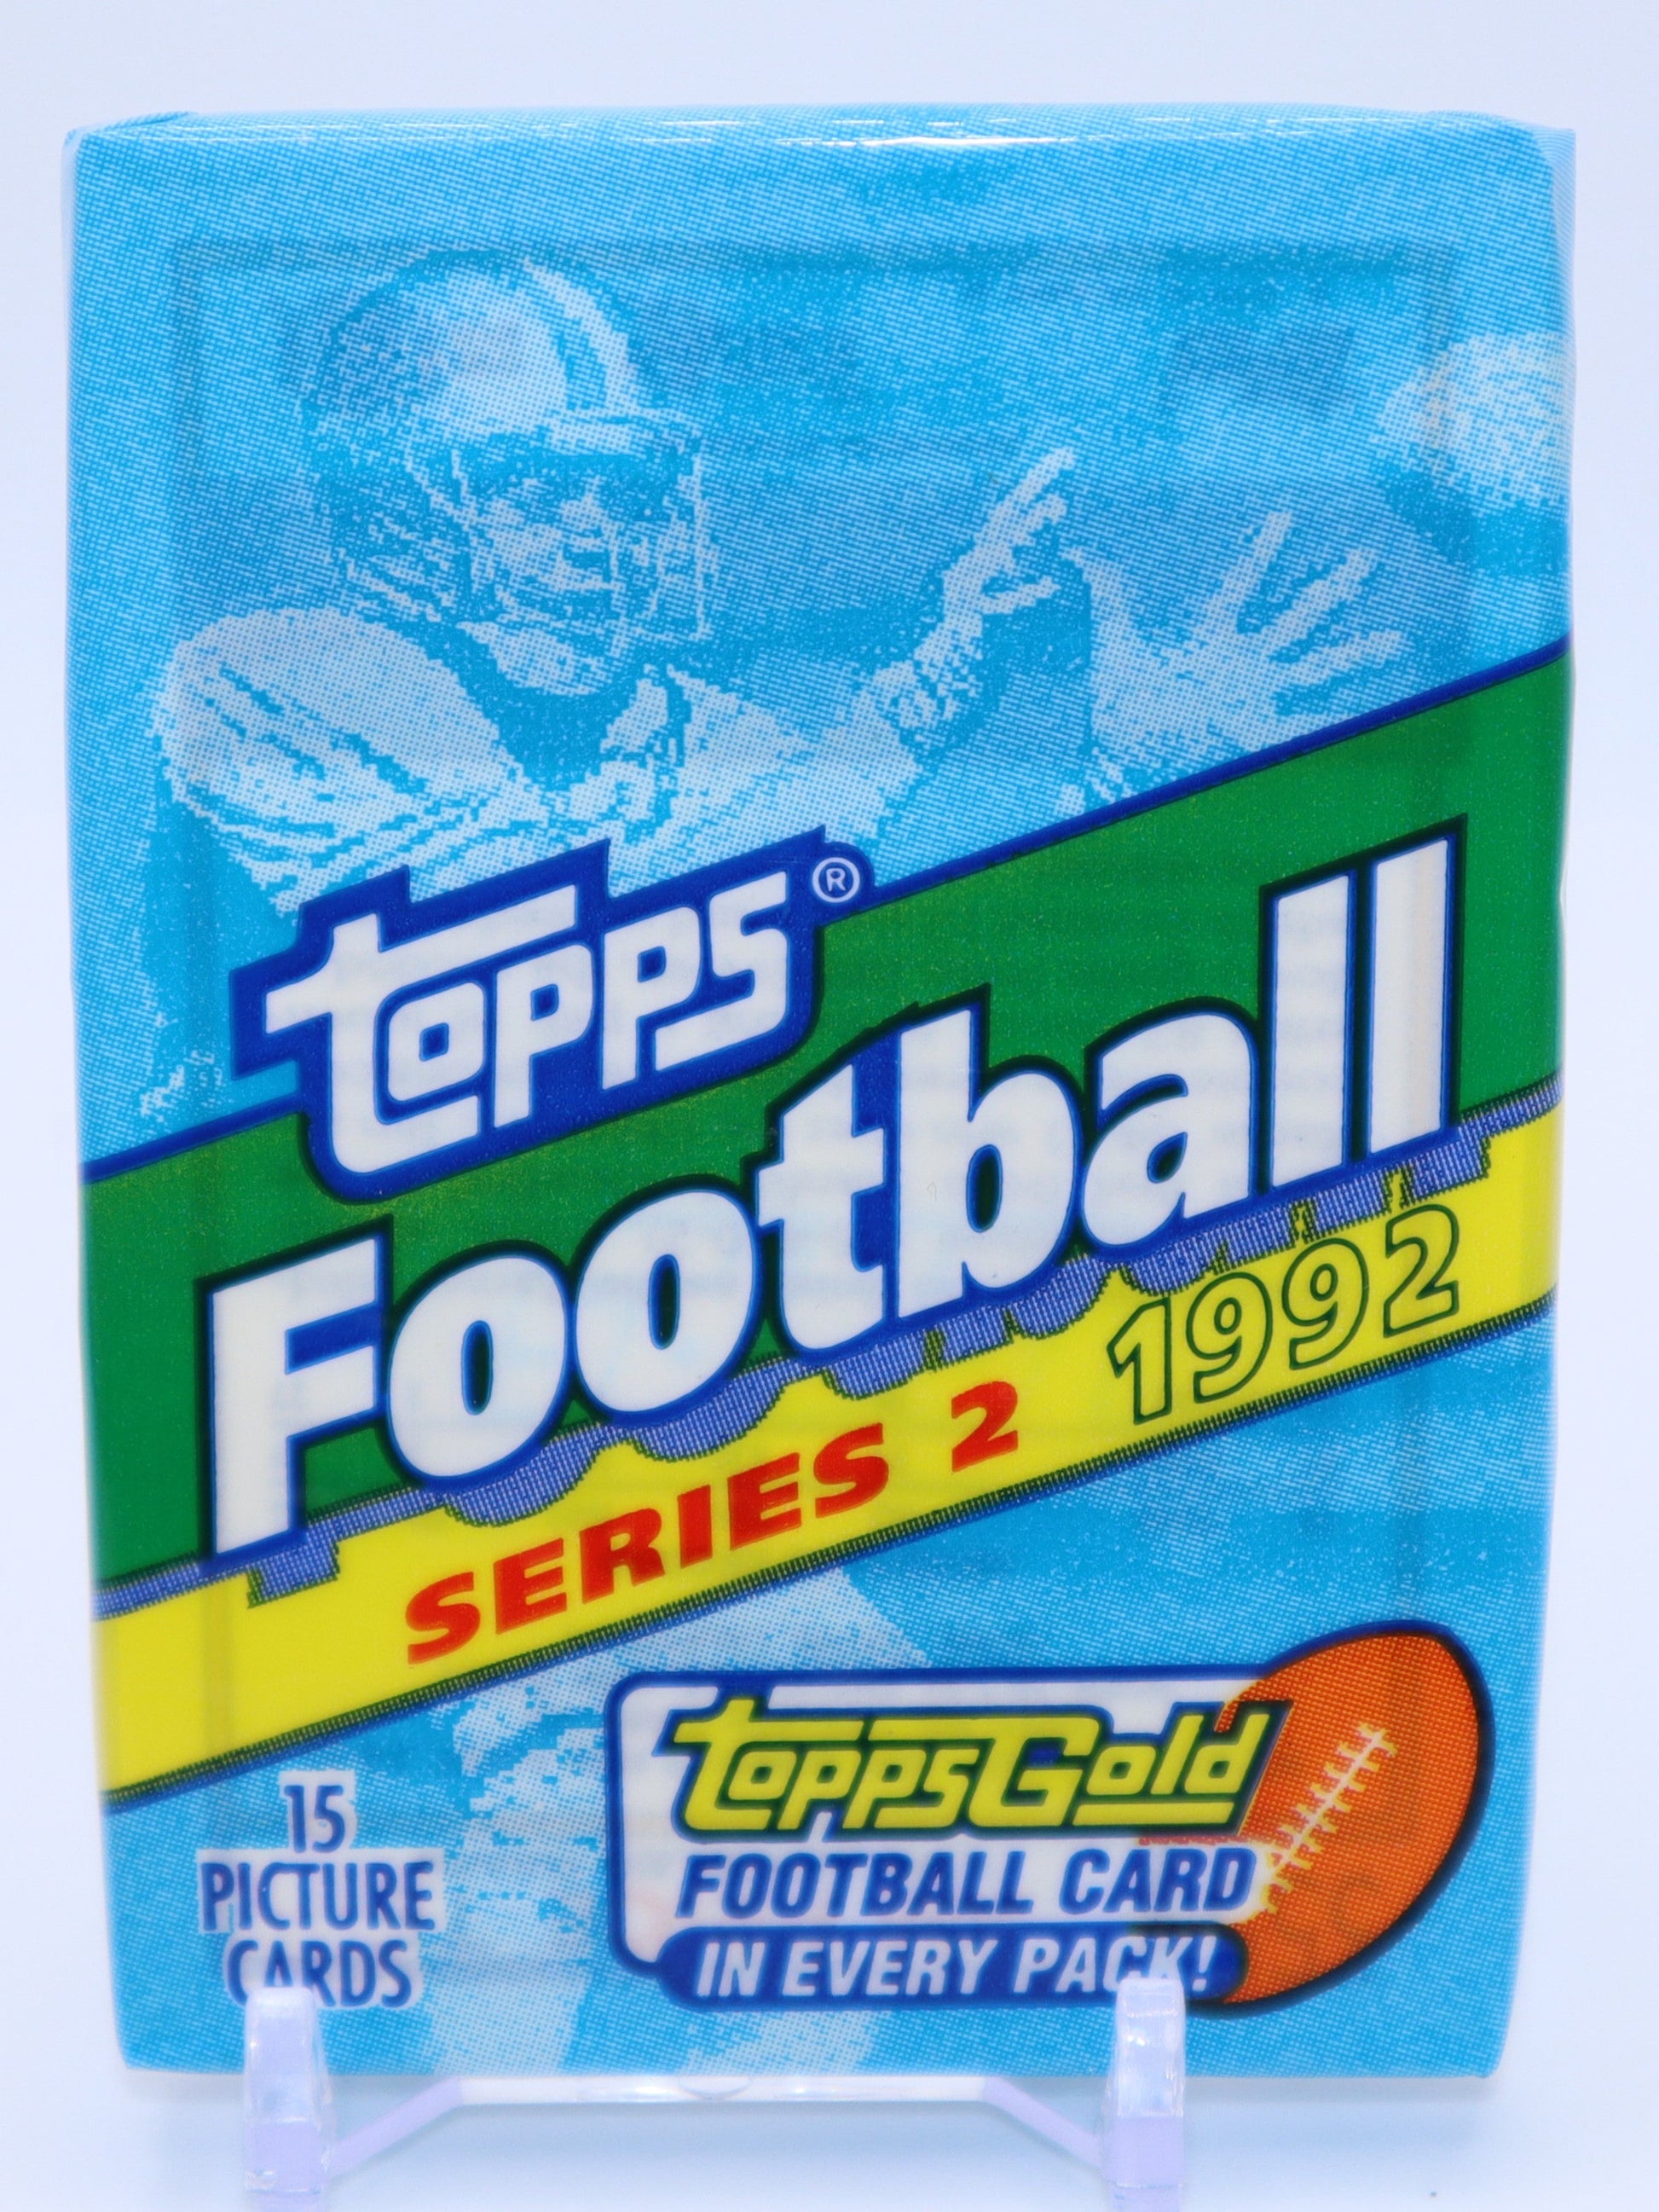 1992 Topps Series 2 NFL Football Cards Wax Pack - Collectibles